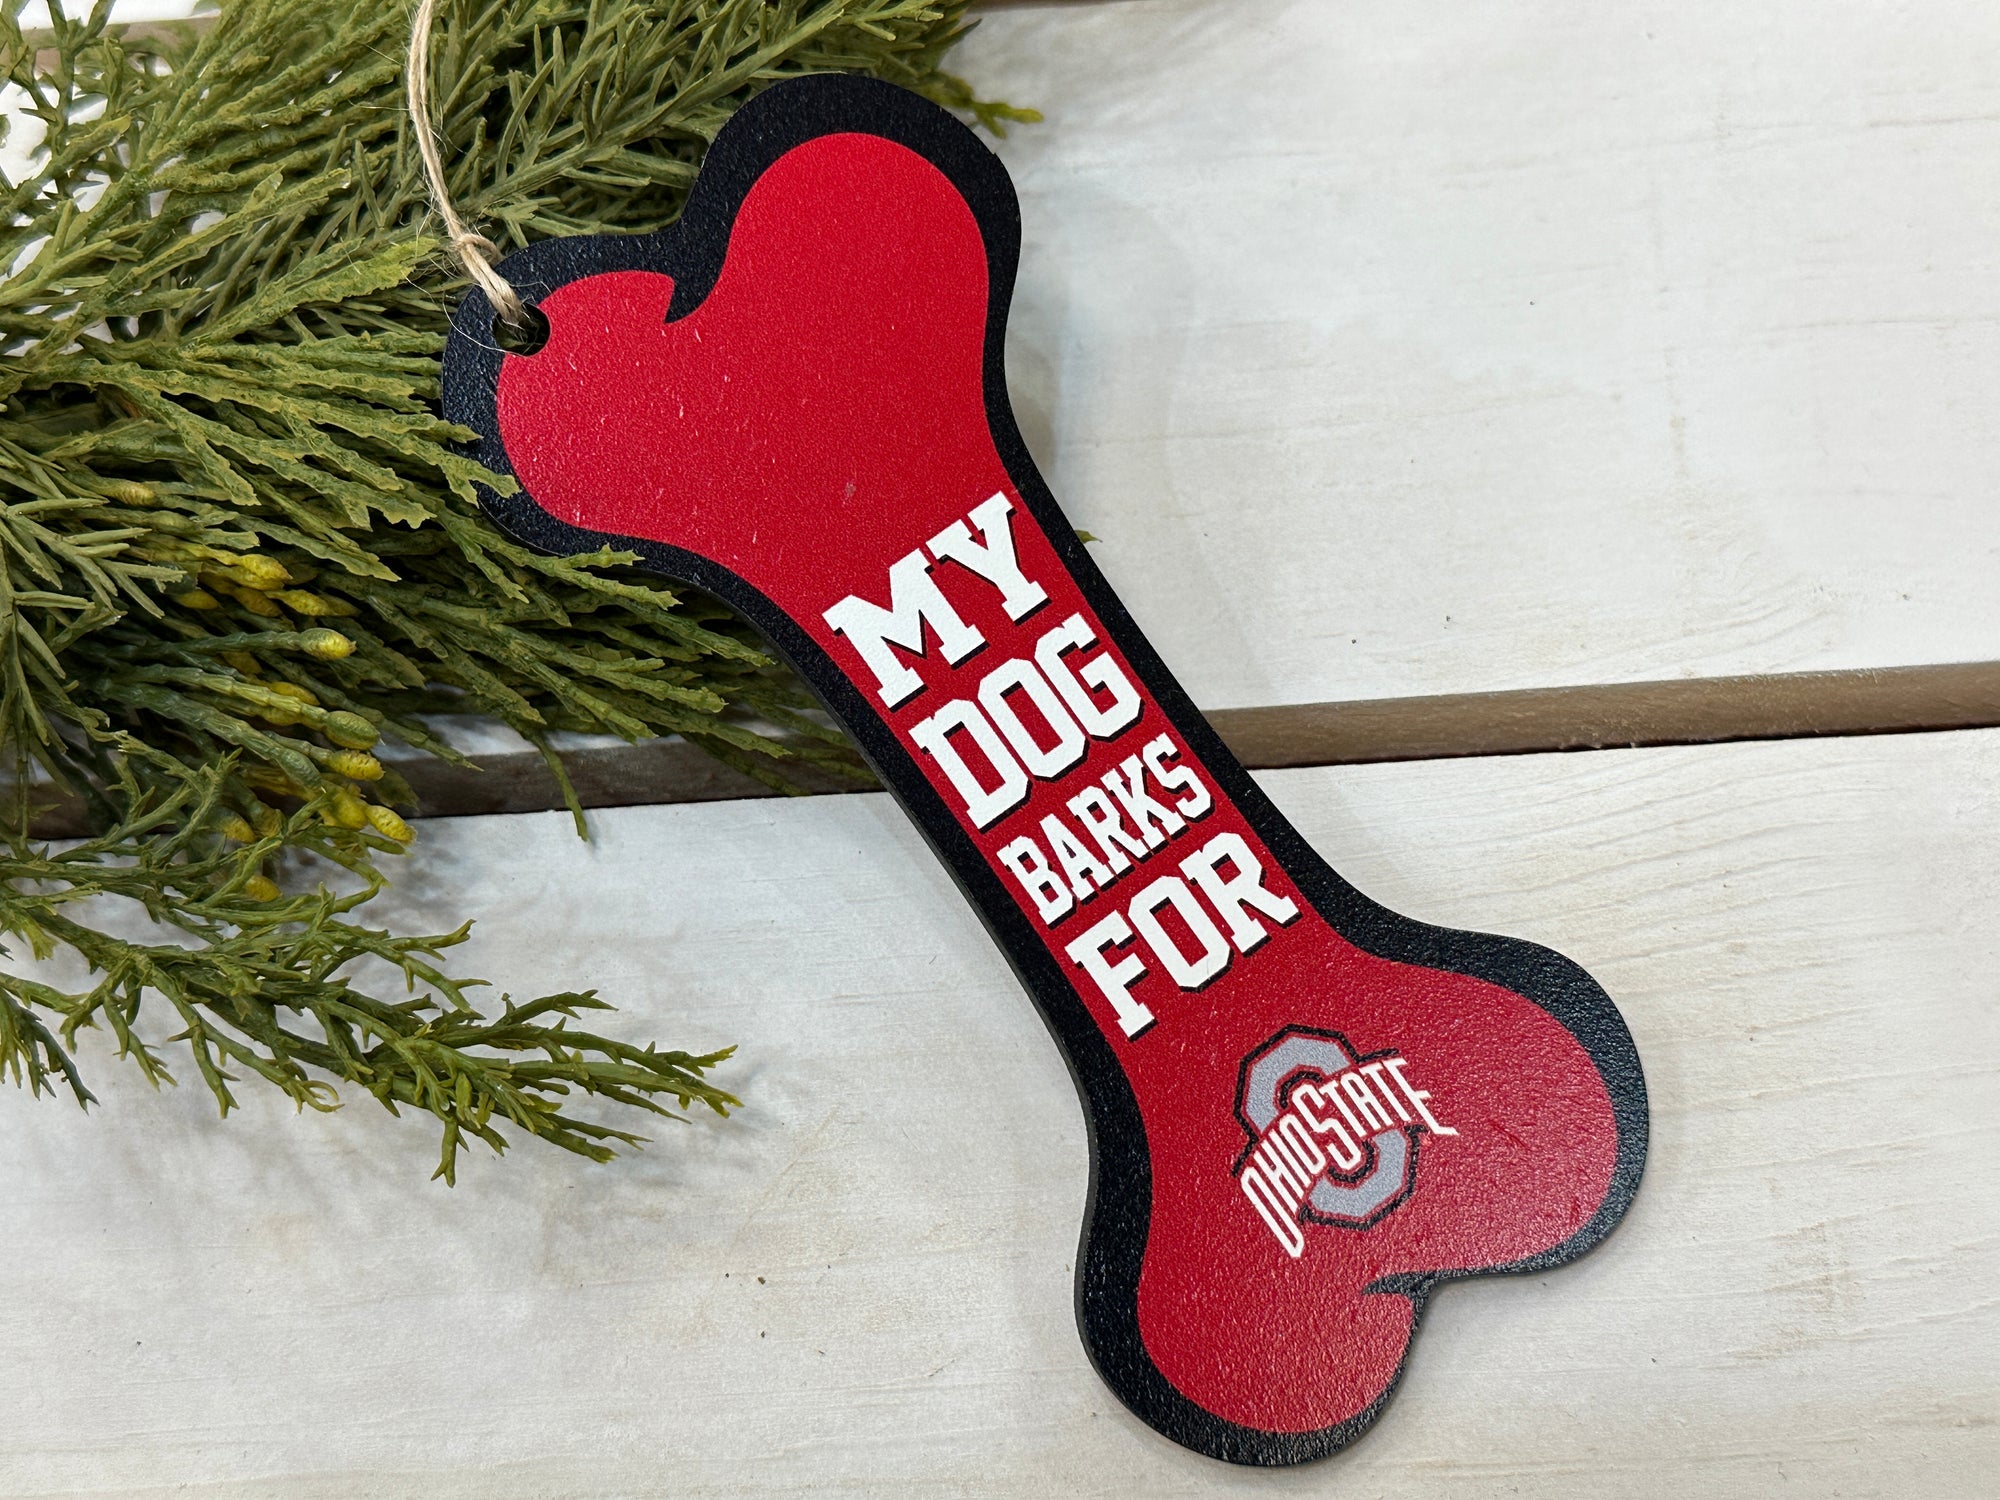 My Dog Barks for Ohio State Ornament